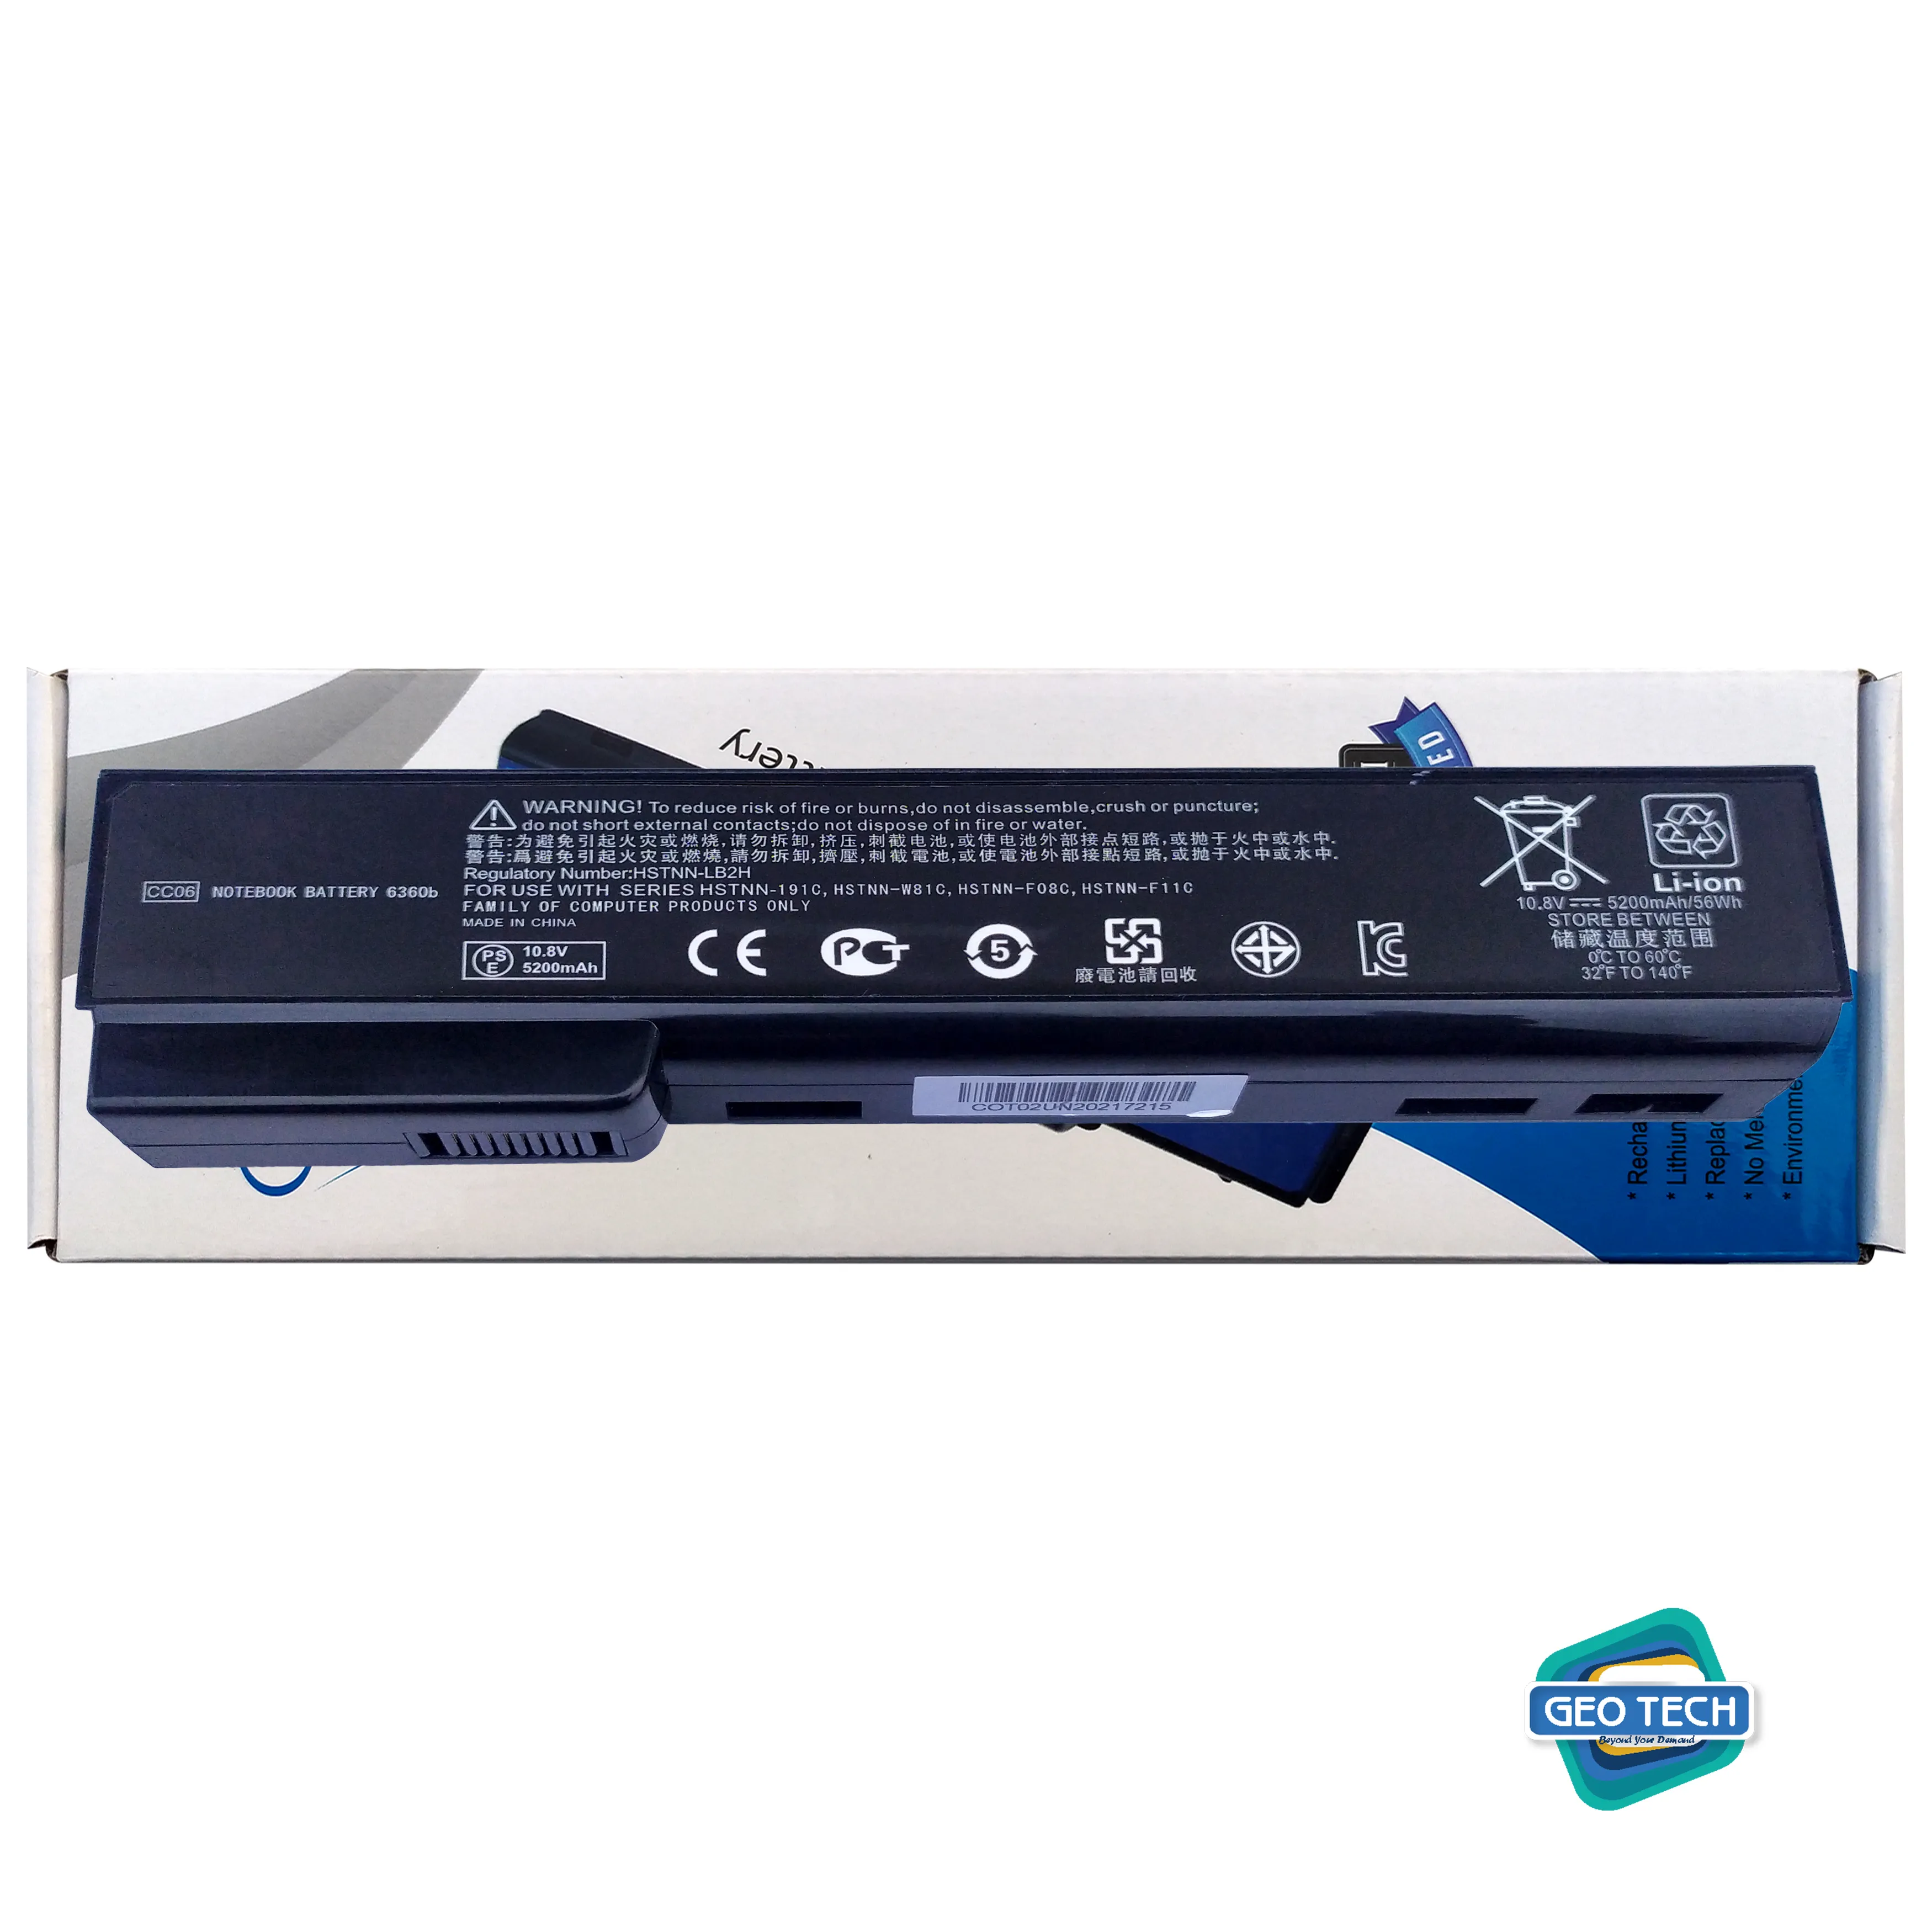 Laptop Battery for HP EliteBook 8460p 8460w 8470p 8470w 8560p 8570p 8770P 6 Cell